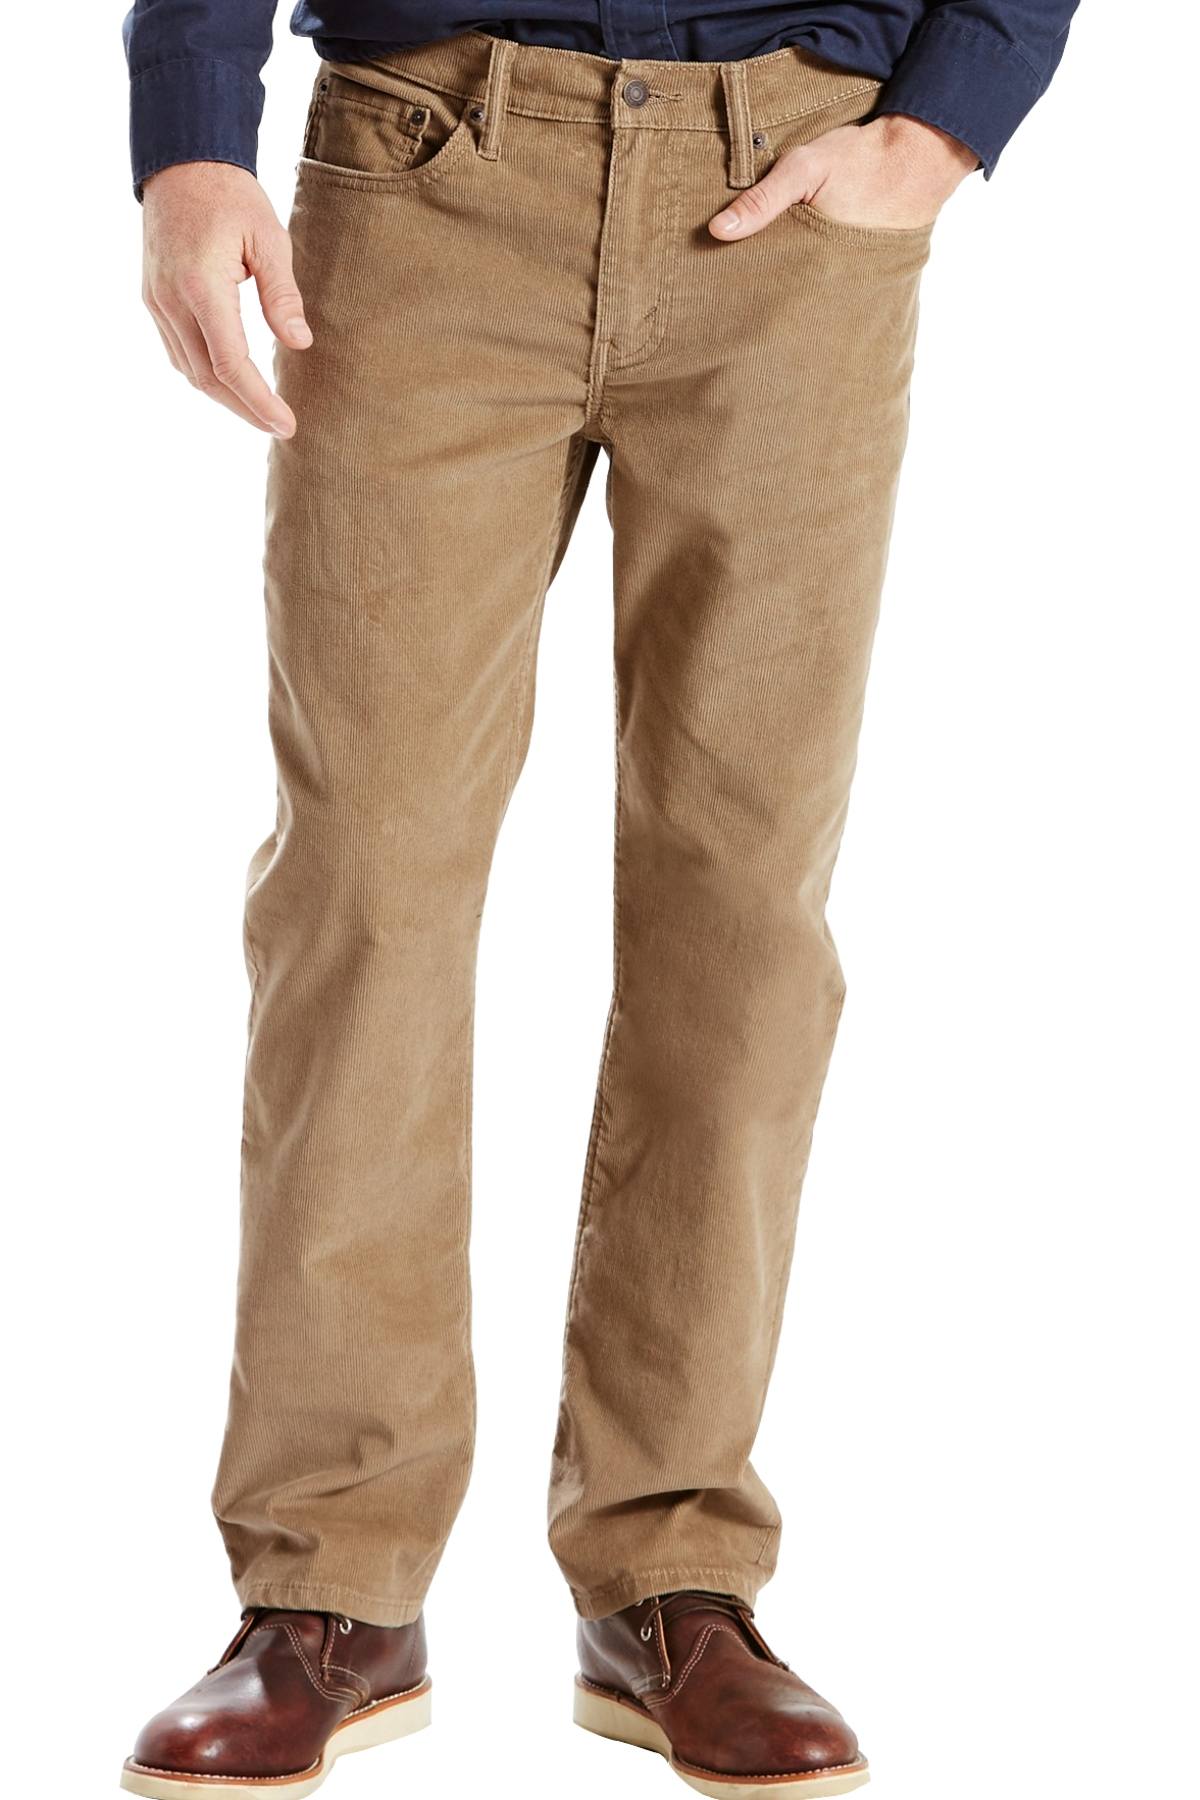 Levi's Lead-Grey 514™ Straight-Fit Corduroy Bedford Pant